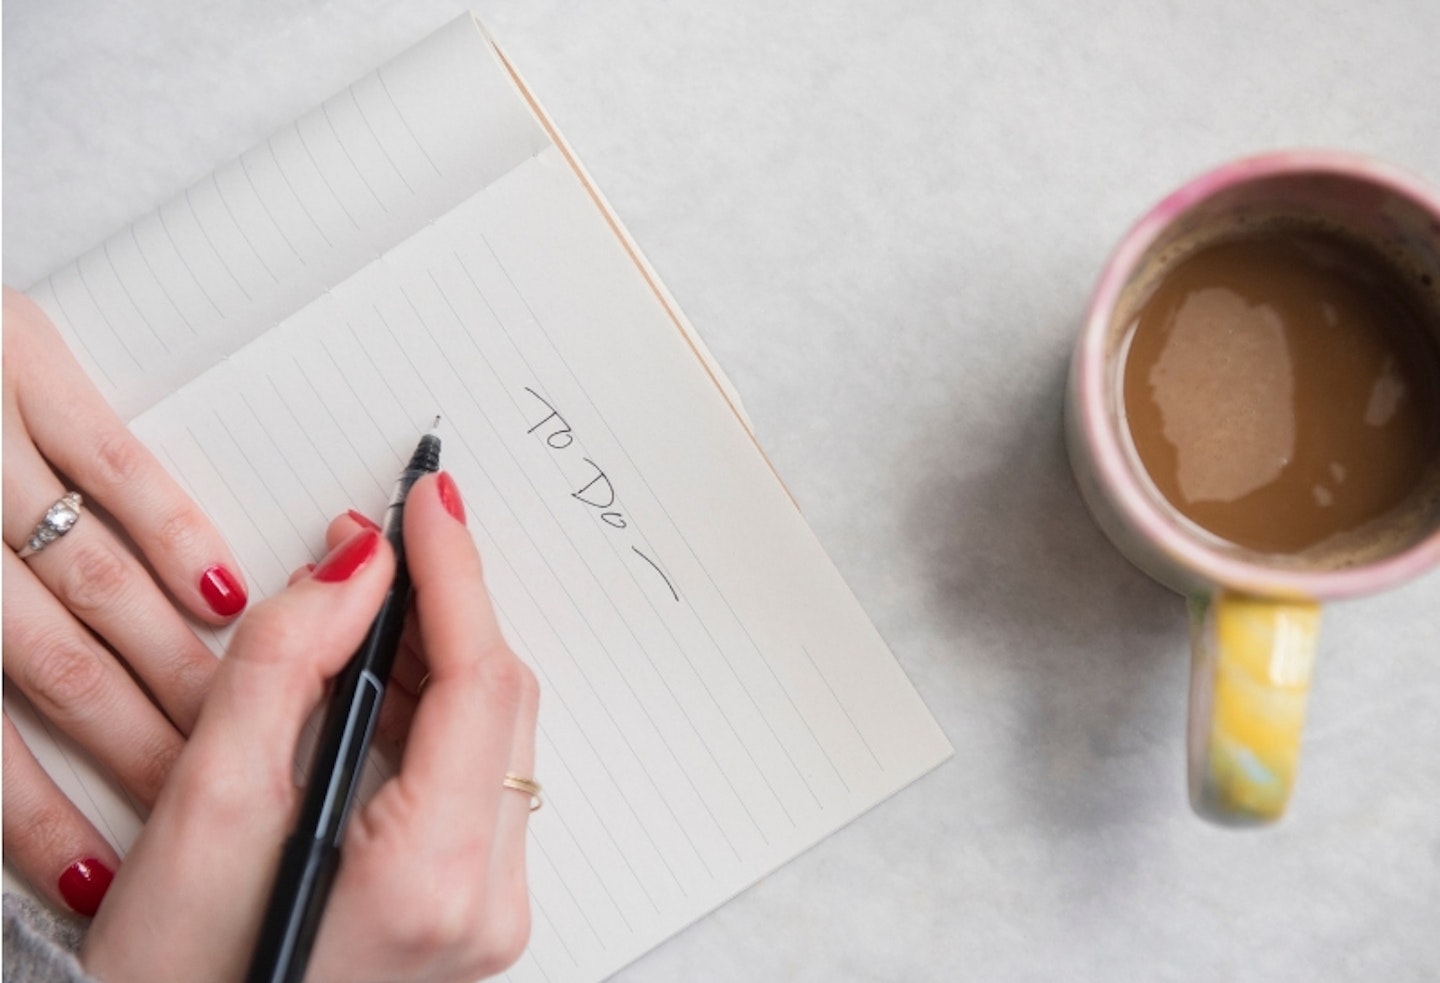 Birds-eye view of a woman's hand writing a to-do list with a coffee mug on the table